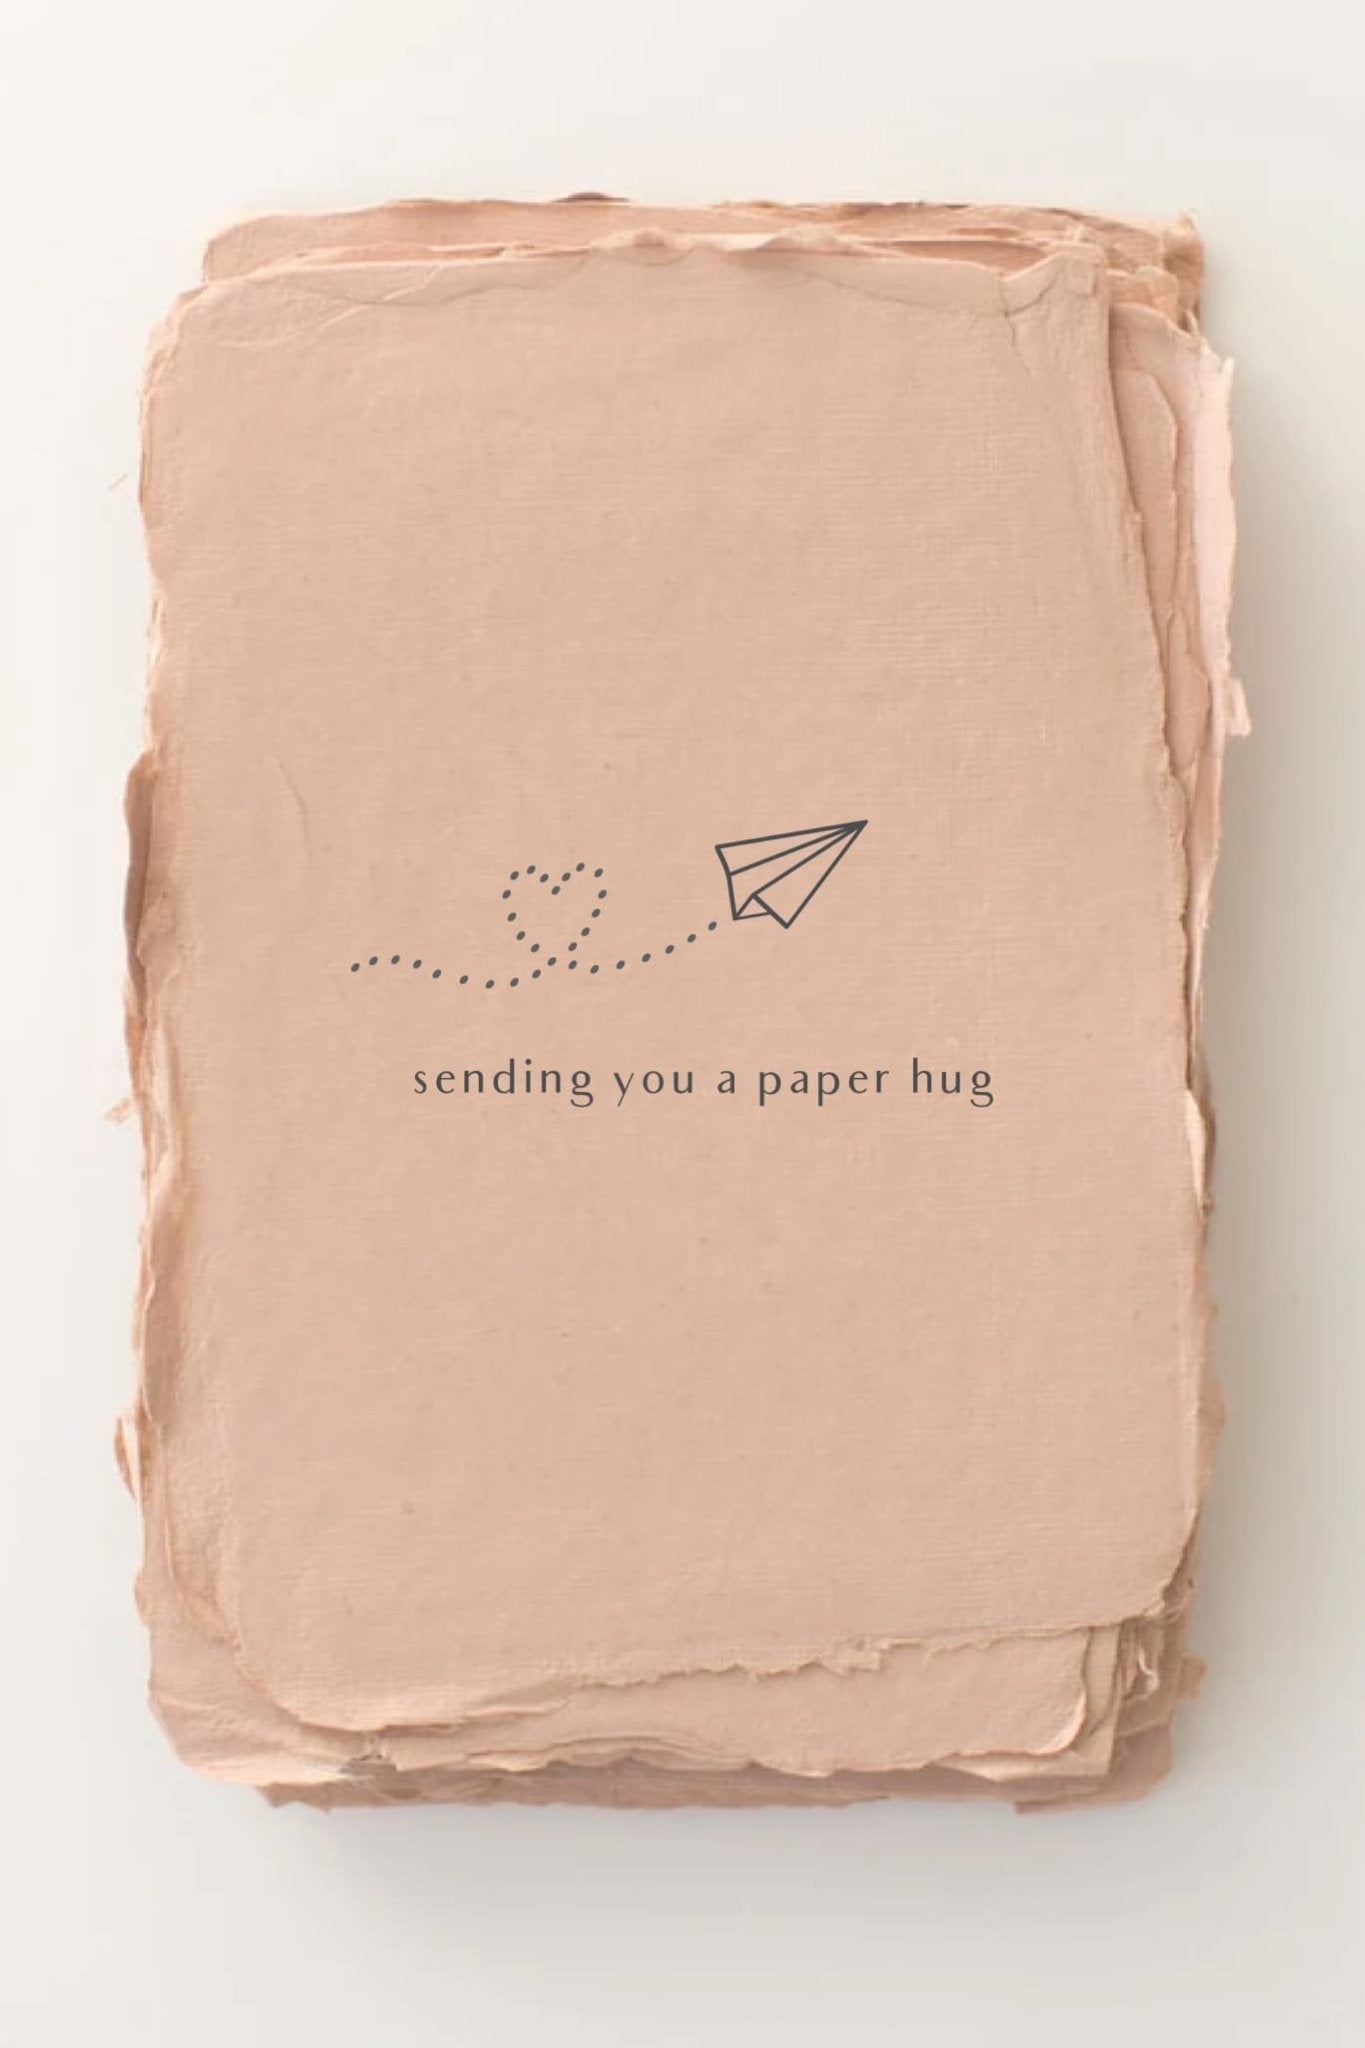 "Sending you a paper hug" Encouragement Greeting Card - Greeting & Note Cards